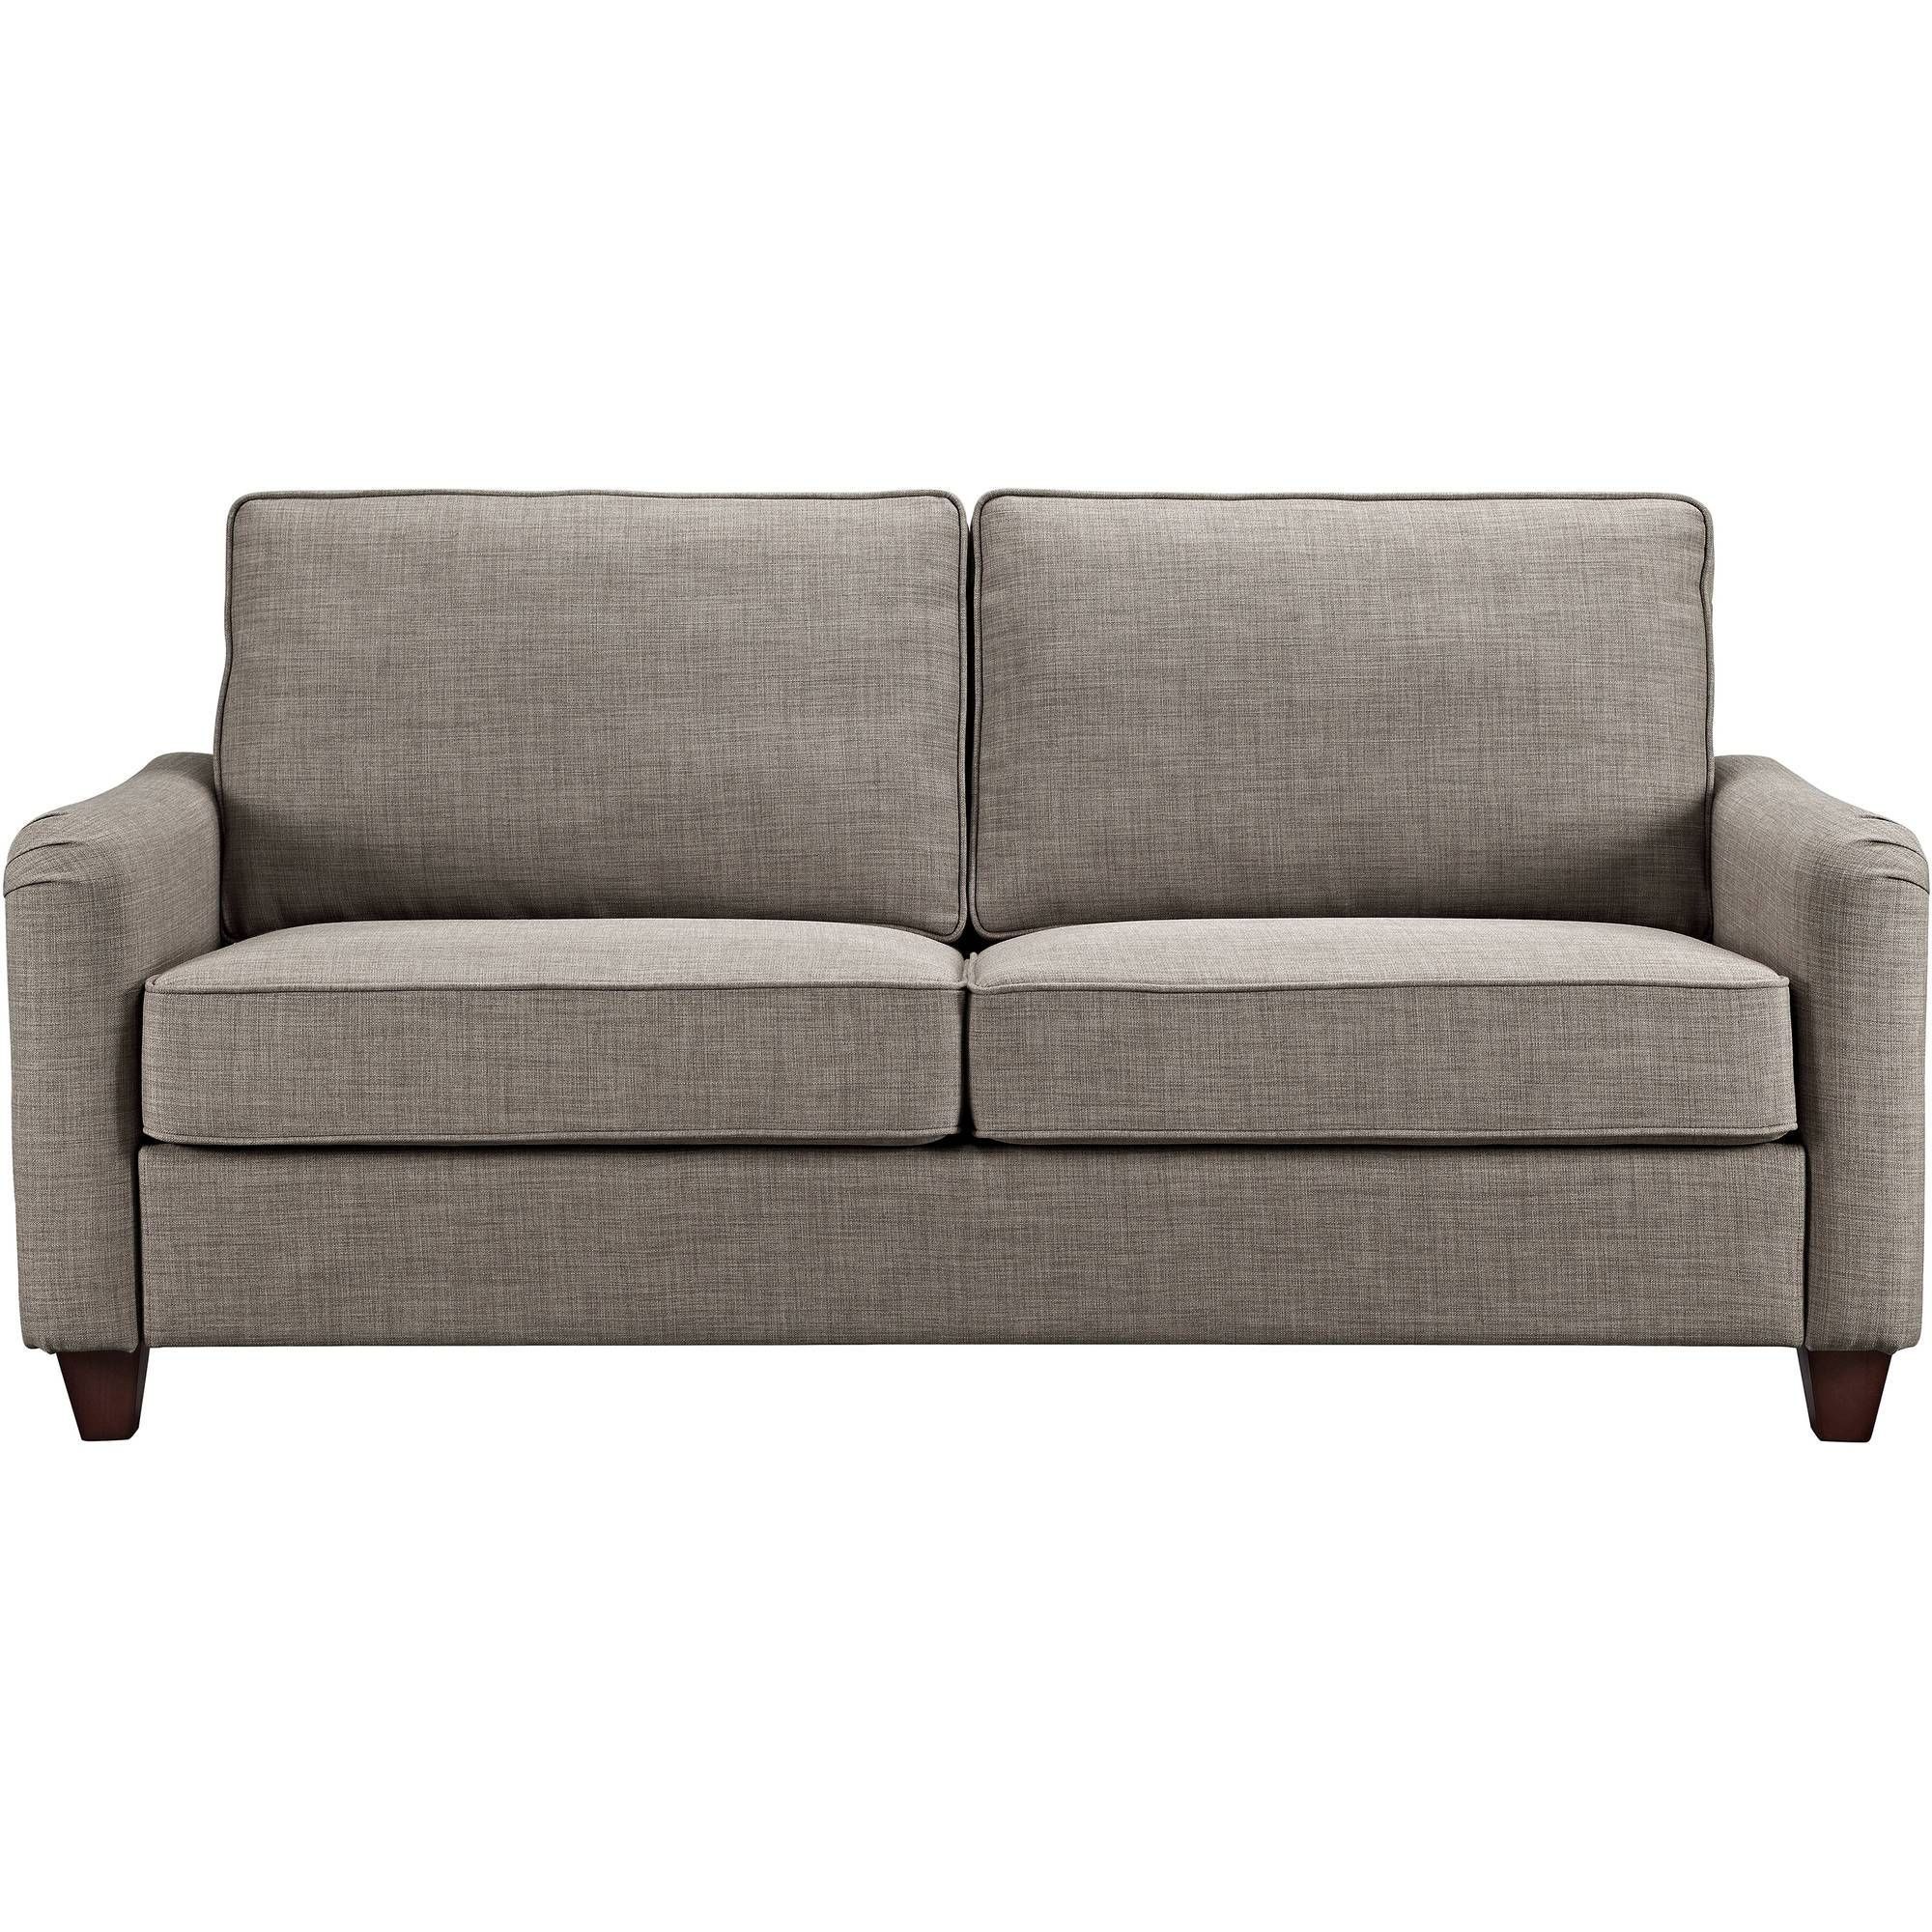 Living Room Furniture Within Wallmart Sofa (View 4 of 25)